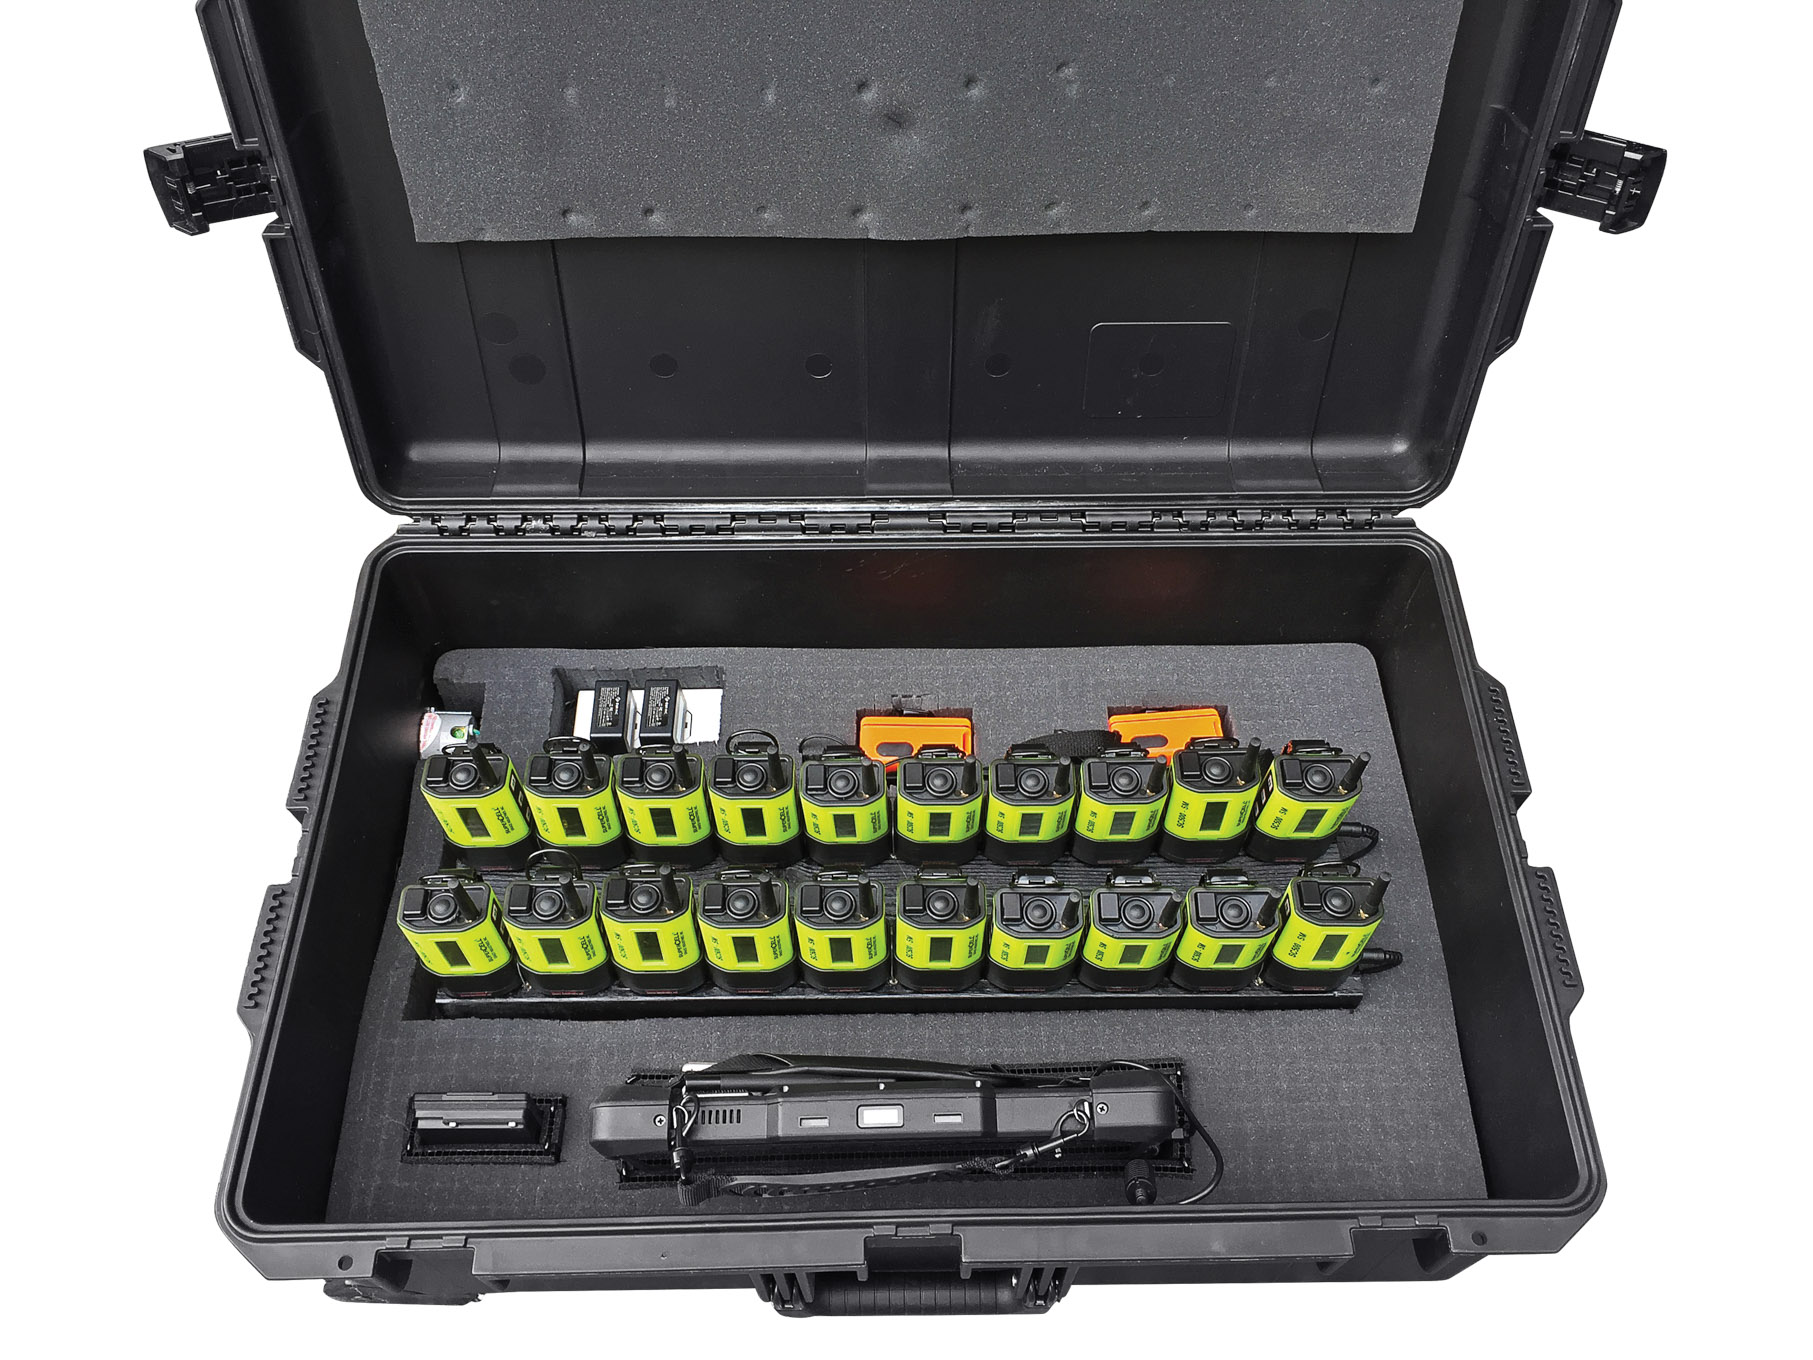 A Pelican Case for Rescue Operations: The iM2950 Pelican Storm 